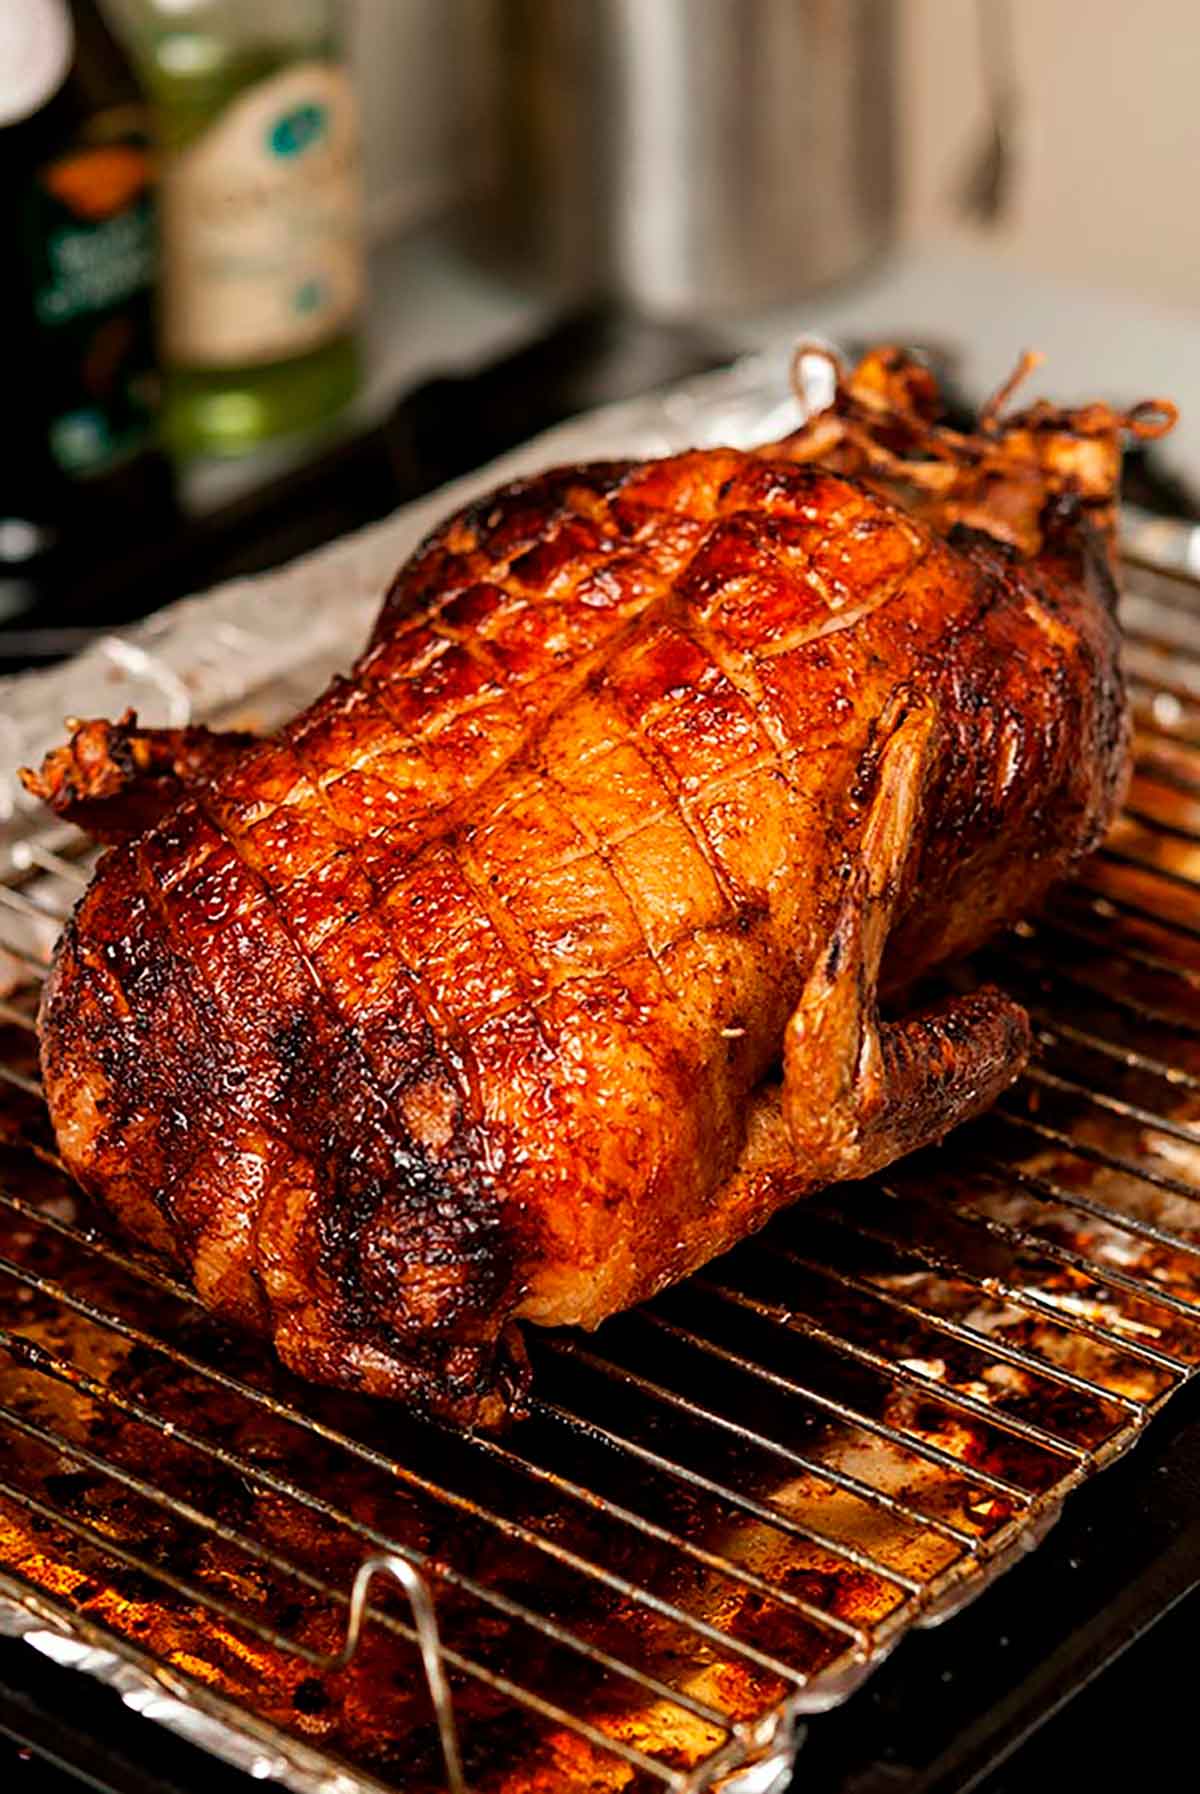 A roasted duck on a baking pan.